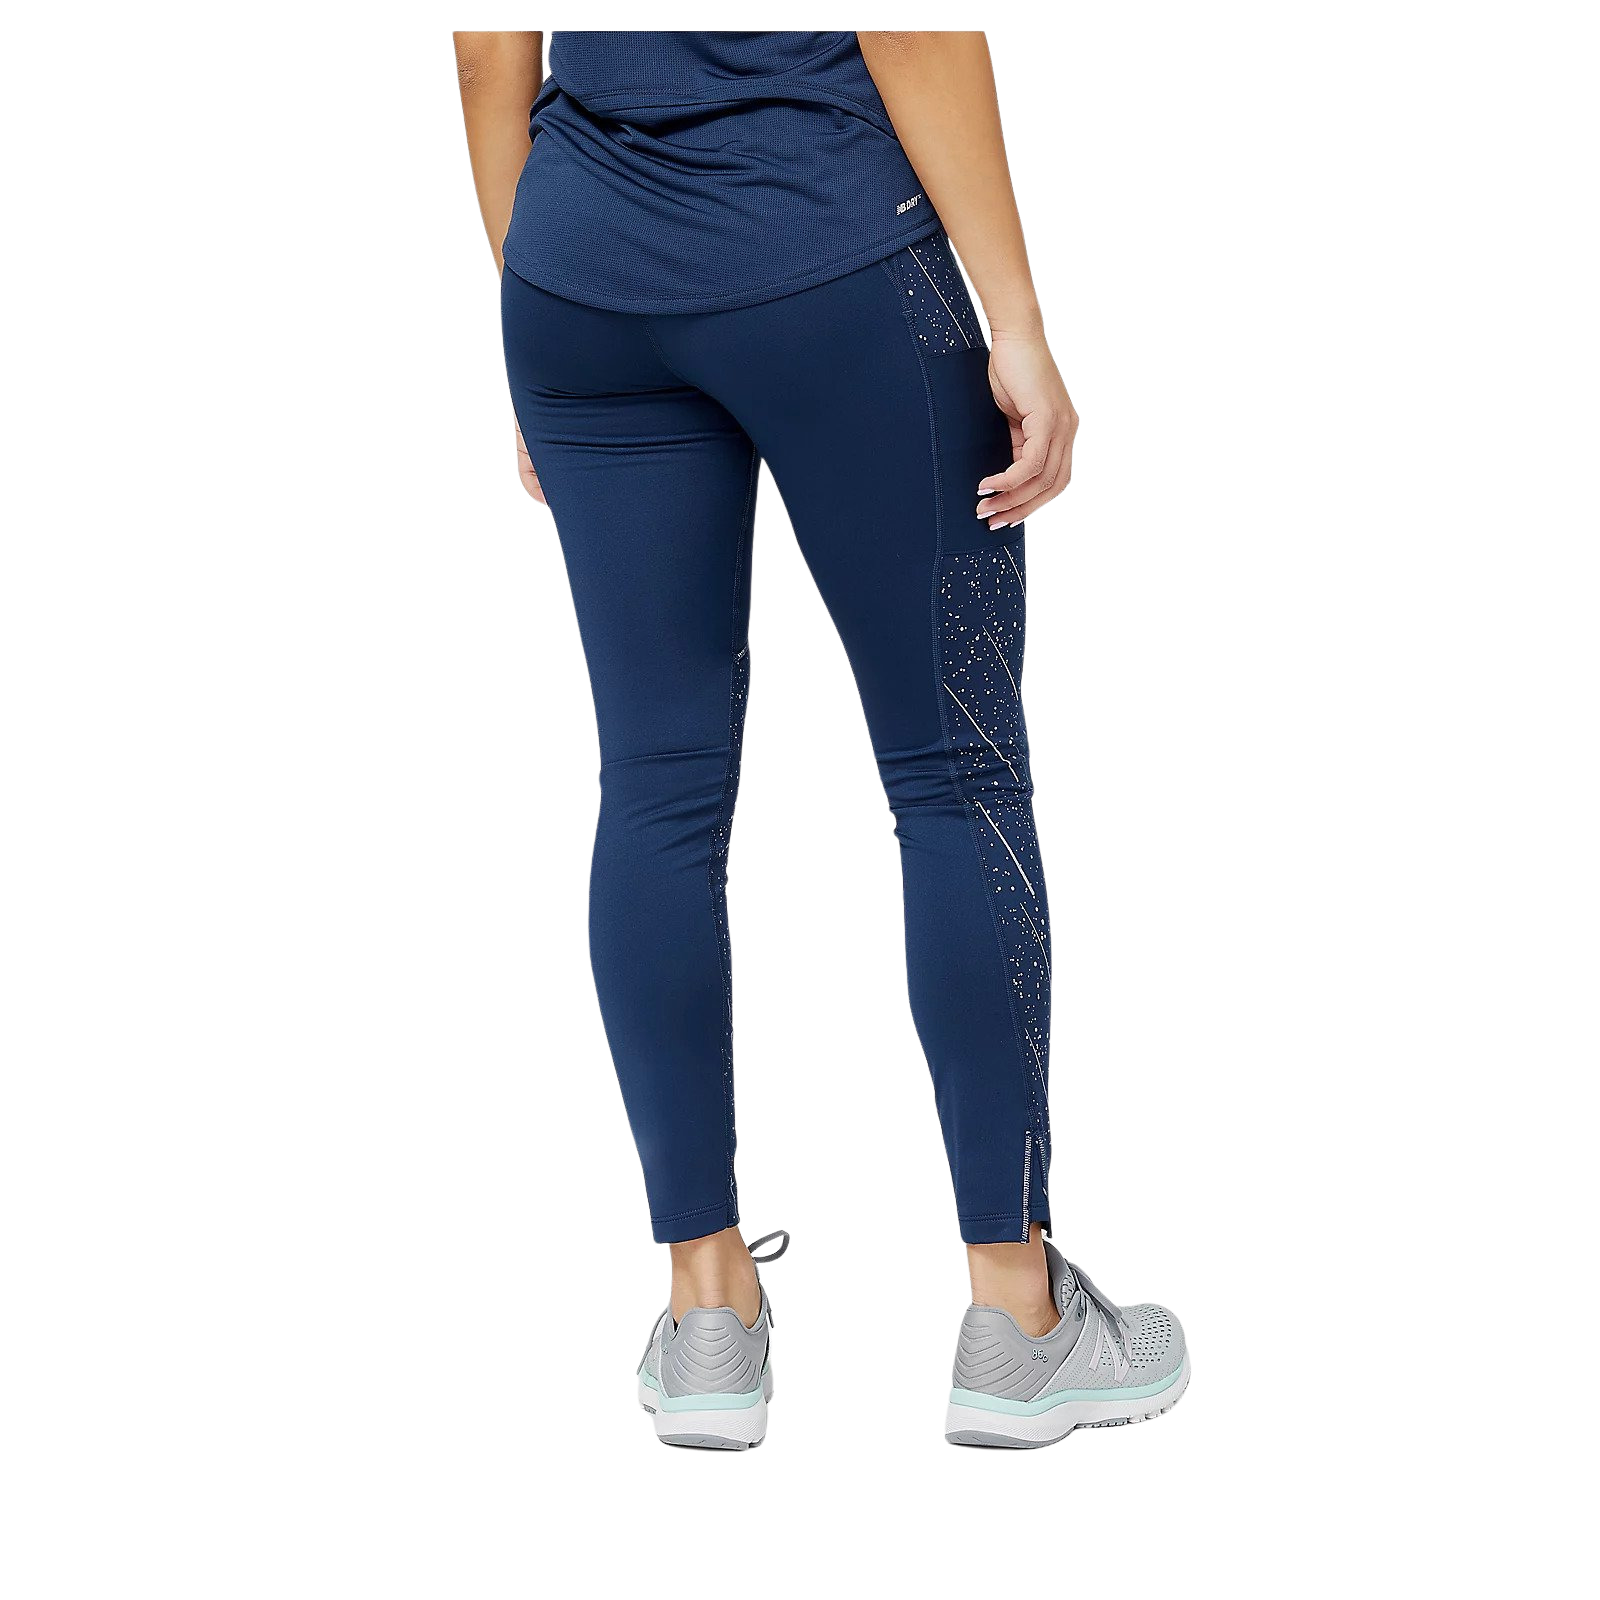 Buy New Balance Reflective Accelerate Tight Women Multicoloured online